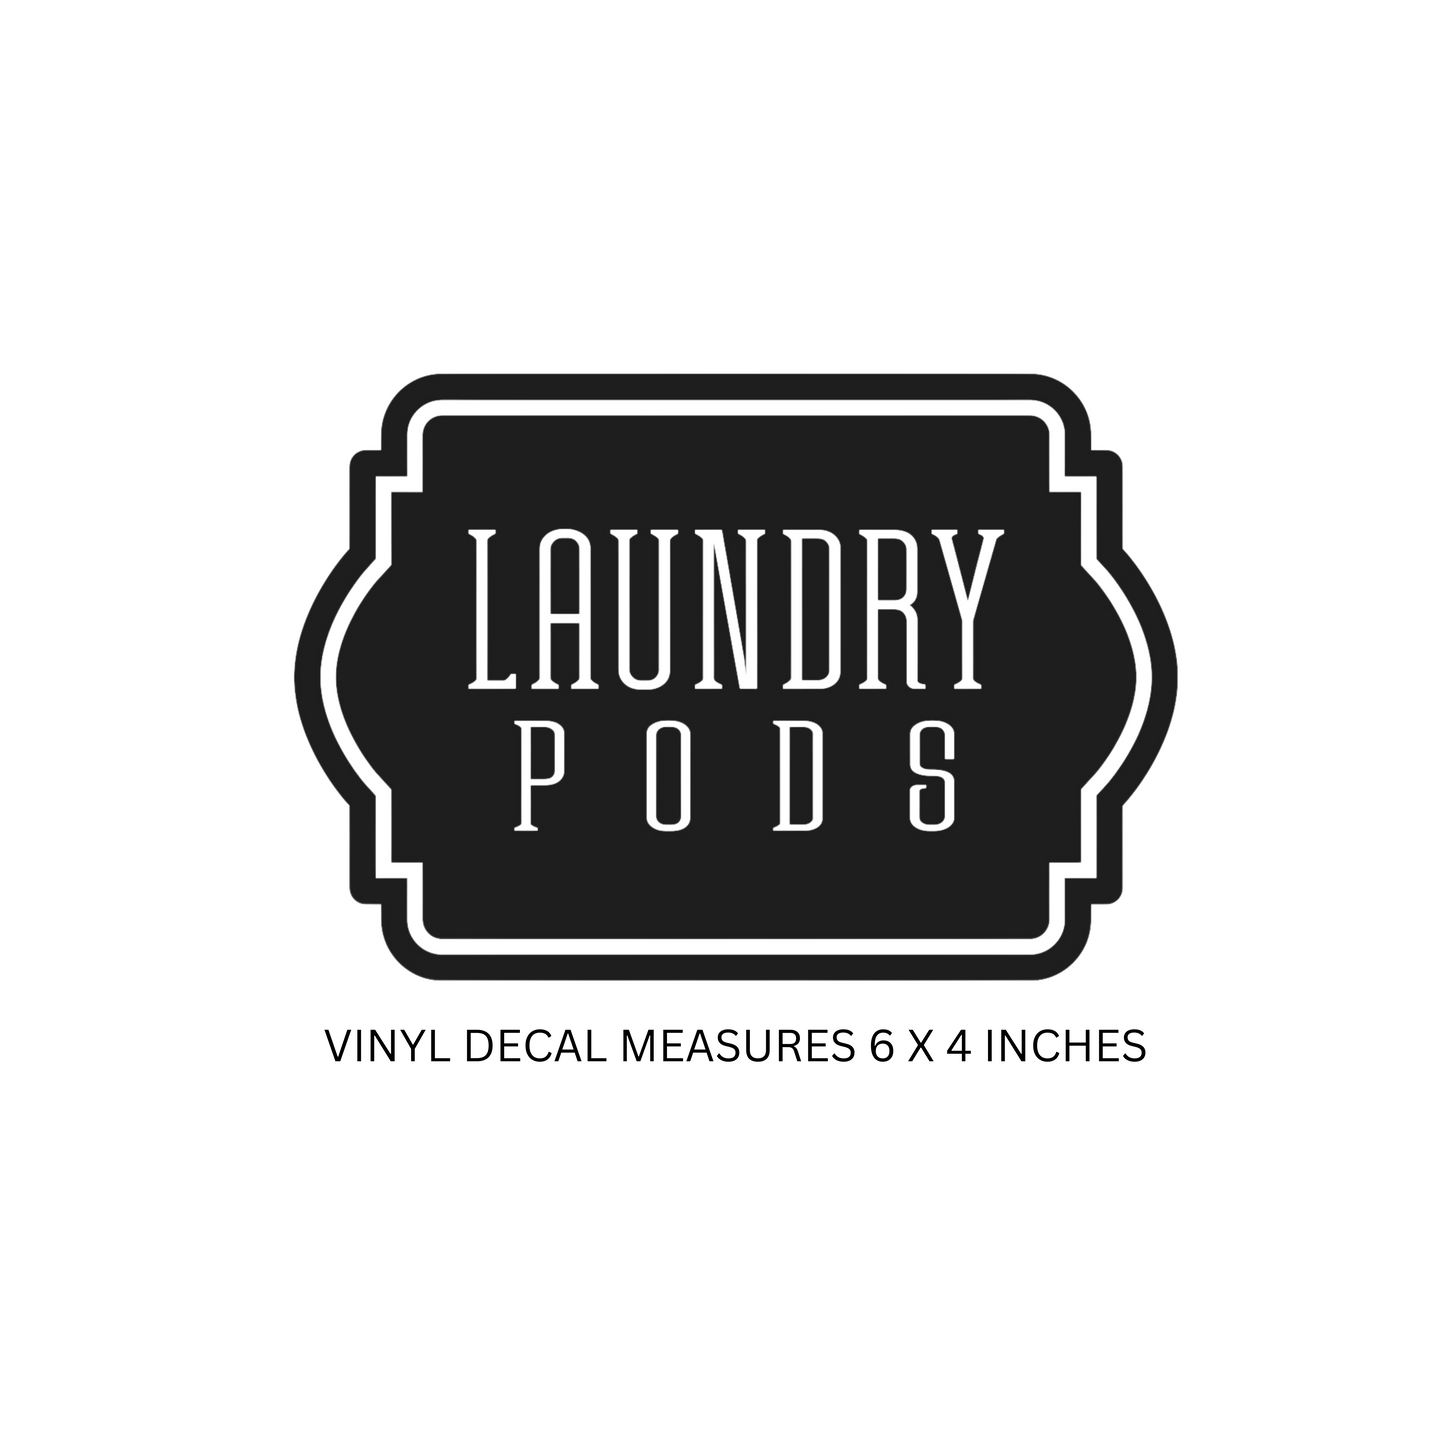 Laundry Pods Decal